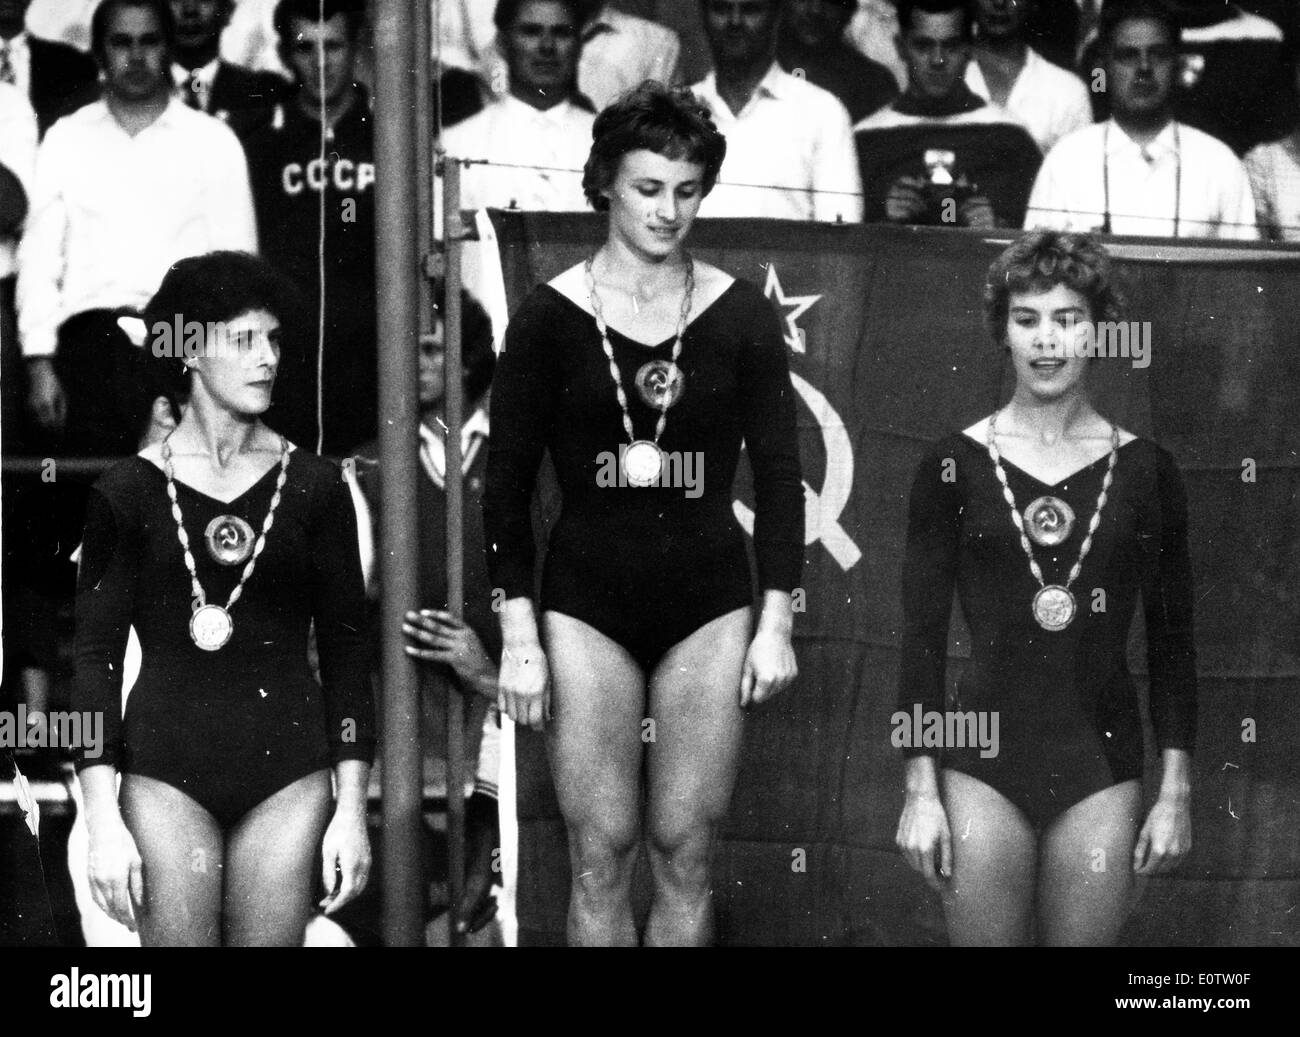 Russian gymnasts on podium at the 1960 Olympic Games Stock Photo